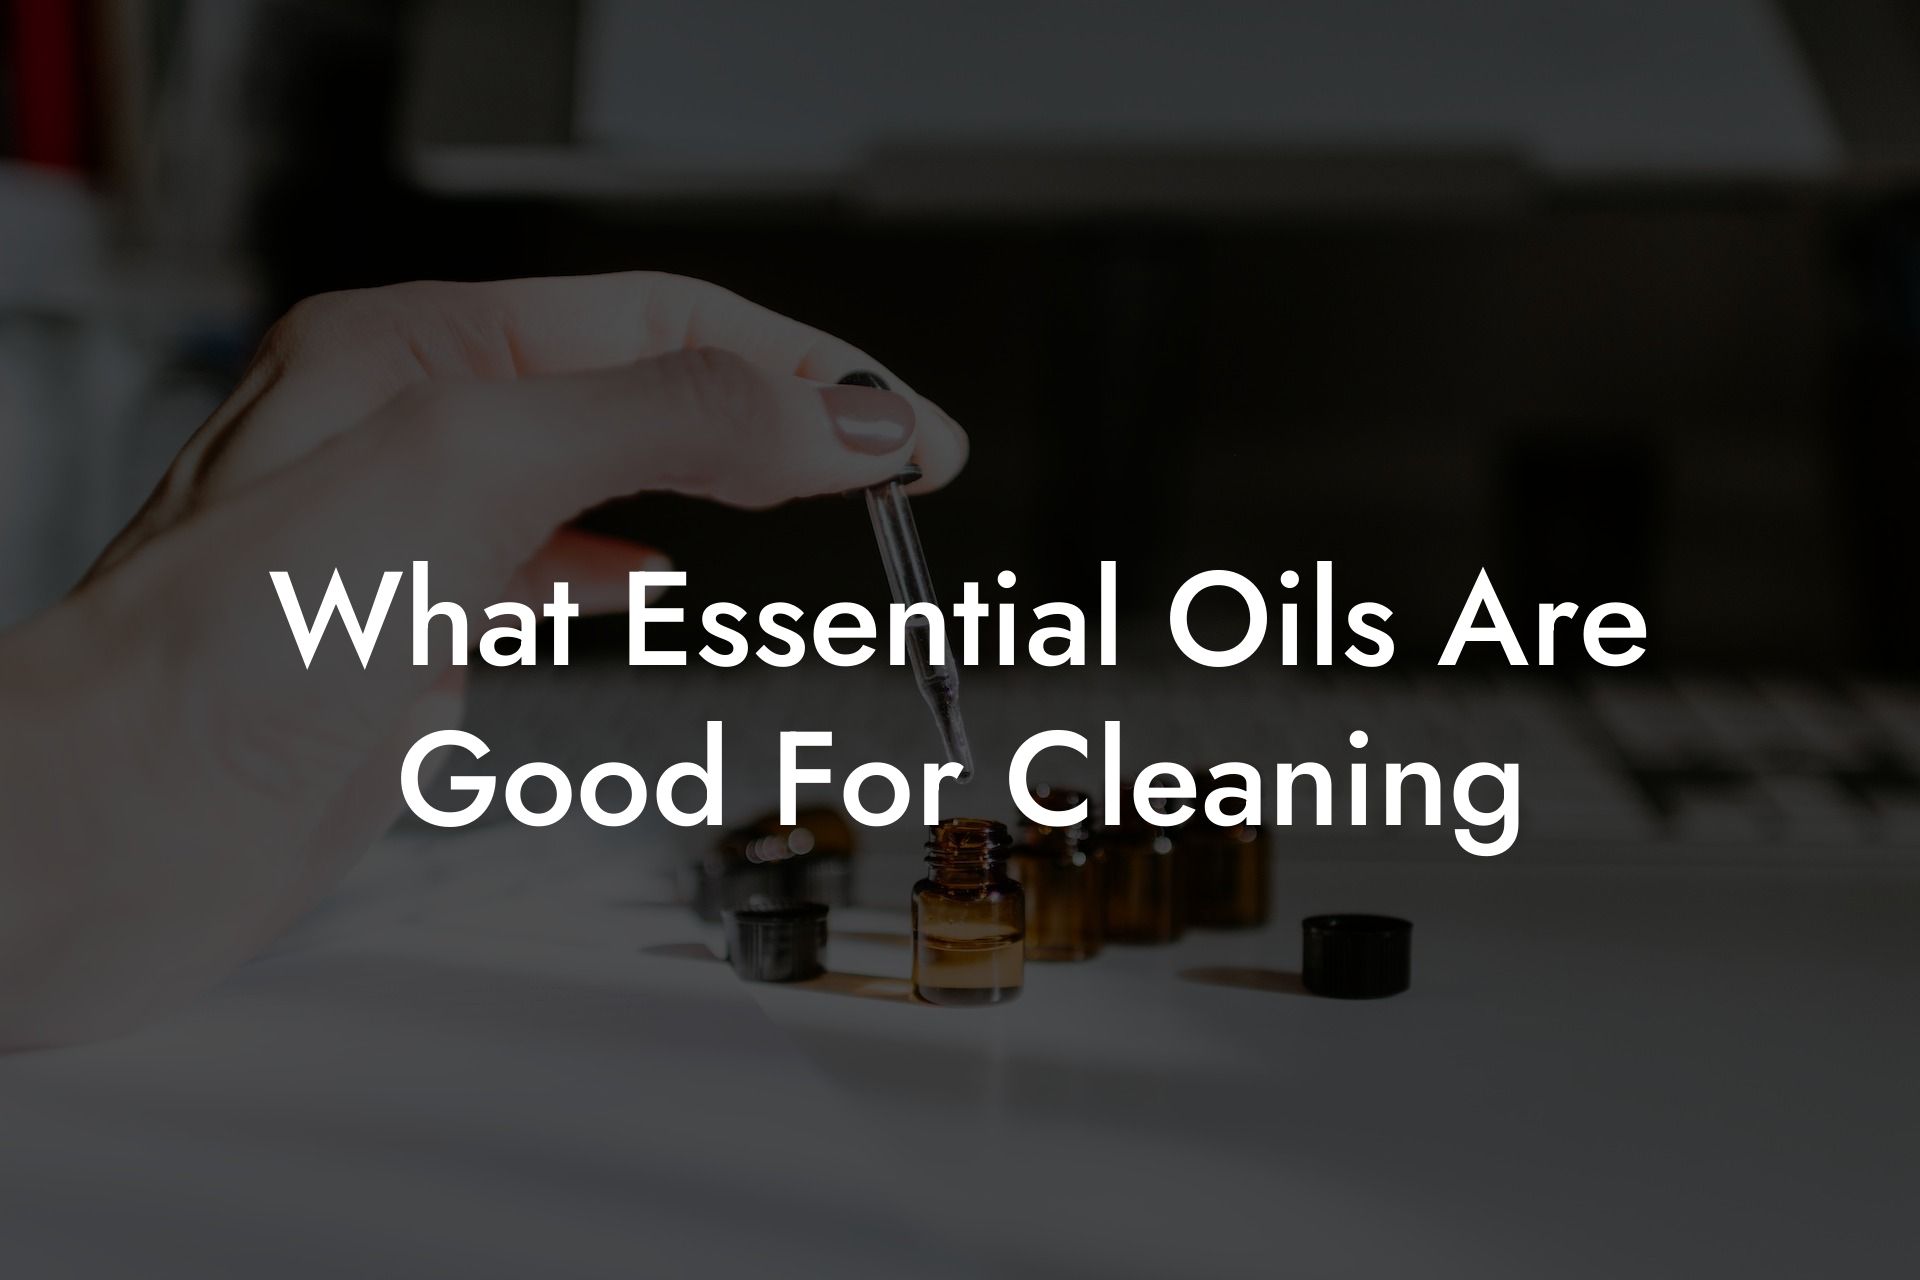 What Essential Oils Are Good For Cleaning